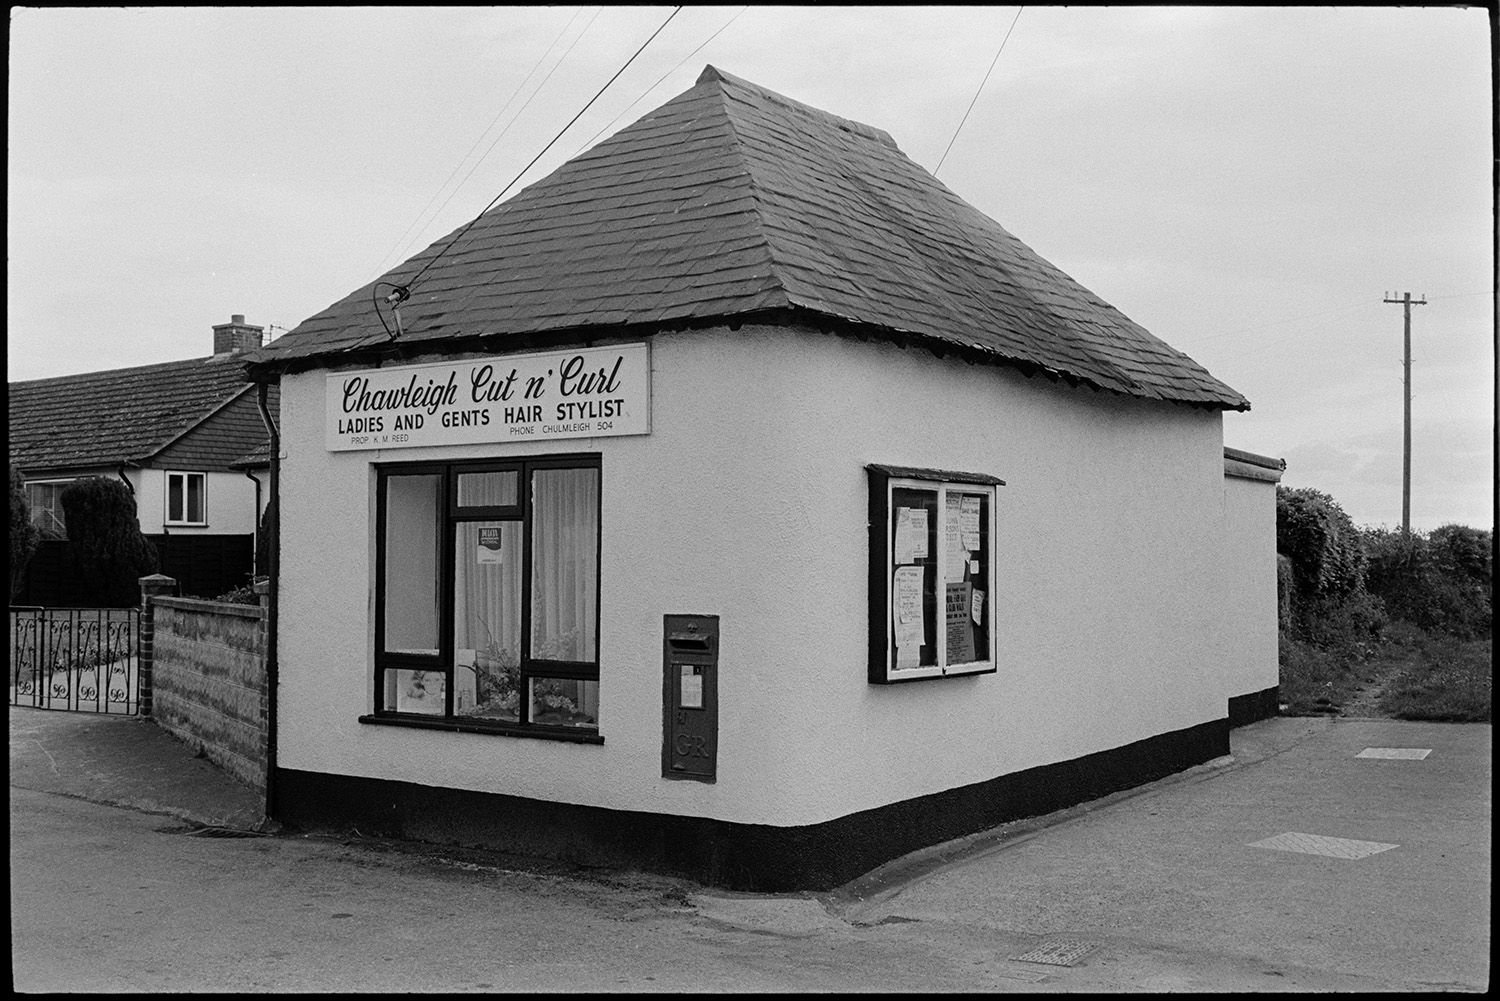 Hairdressing salon in village.
[The  shop front of 'Chawleigh Cut n' Curl' ladies and gents hair stylist in Chawleigh. A post box is set into the wall of the hairdresser and a noticeboard is on the other side of the building.]